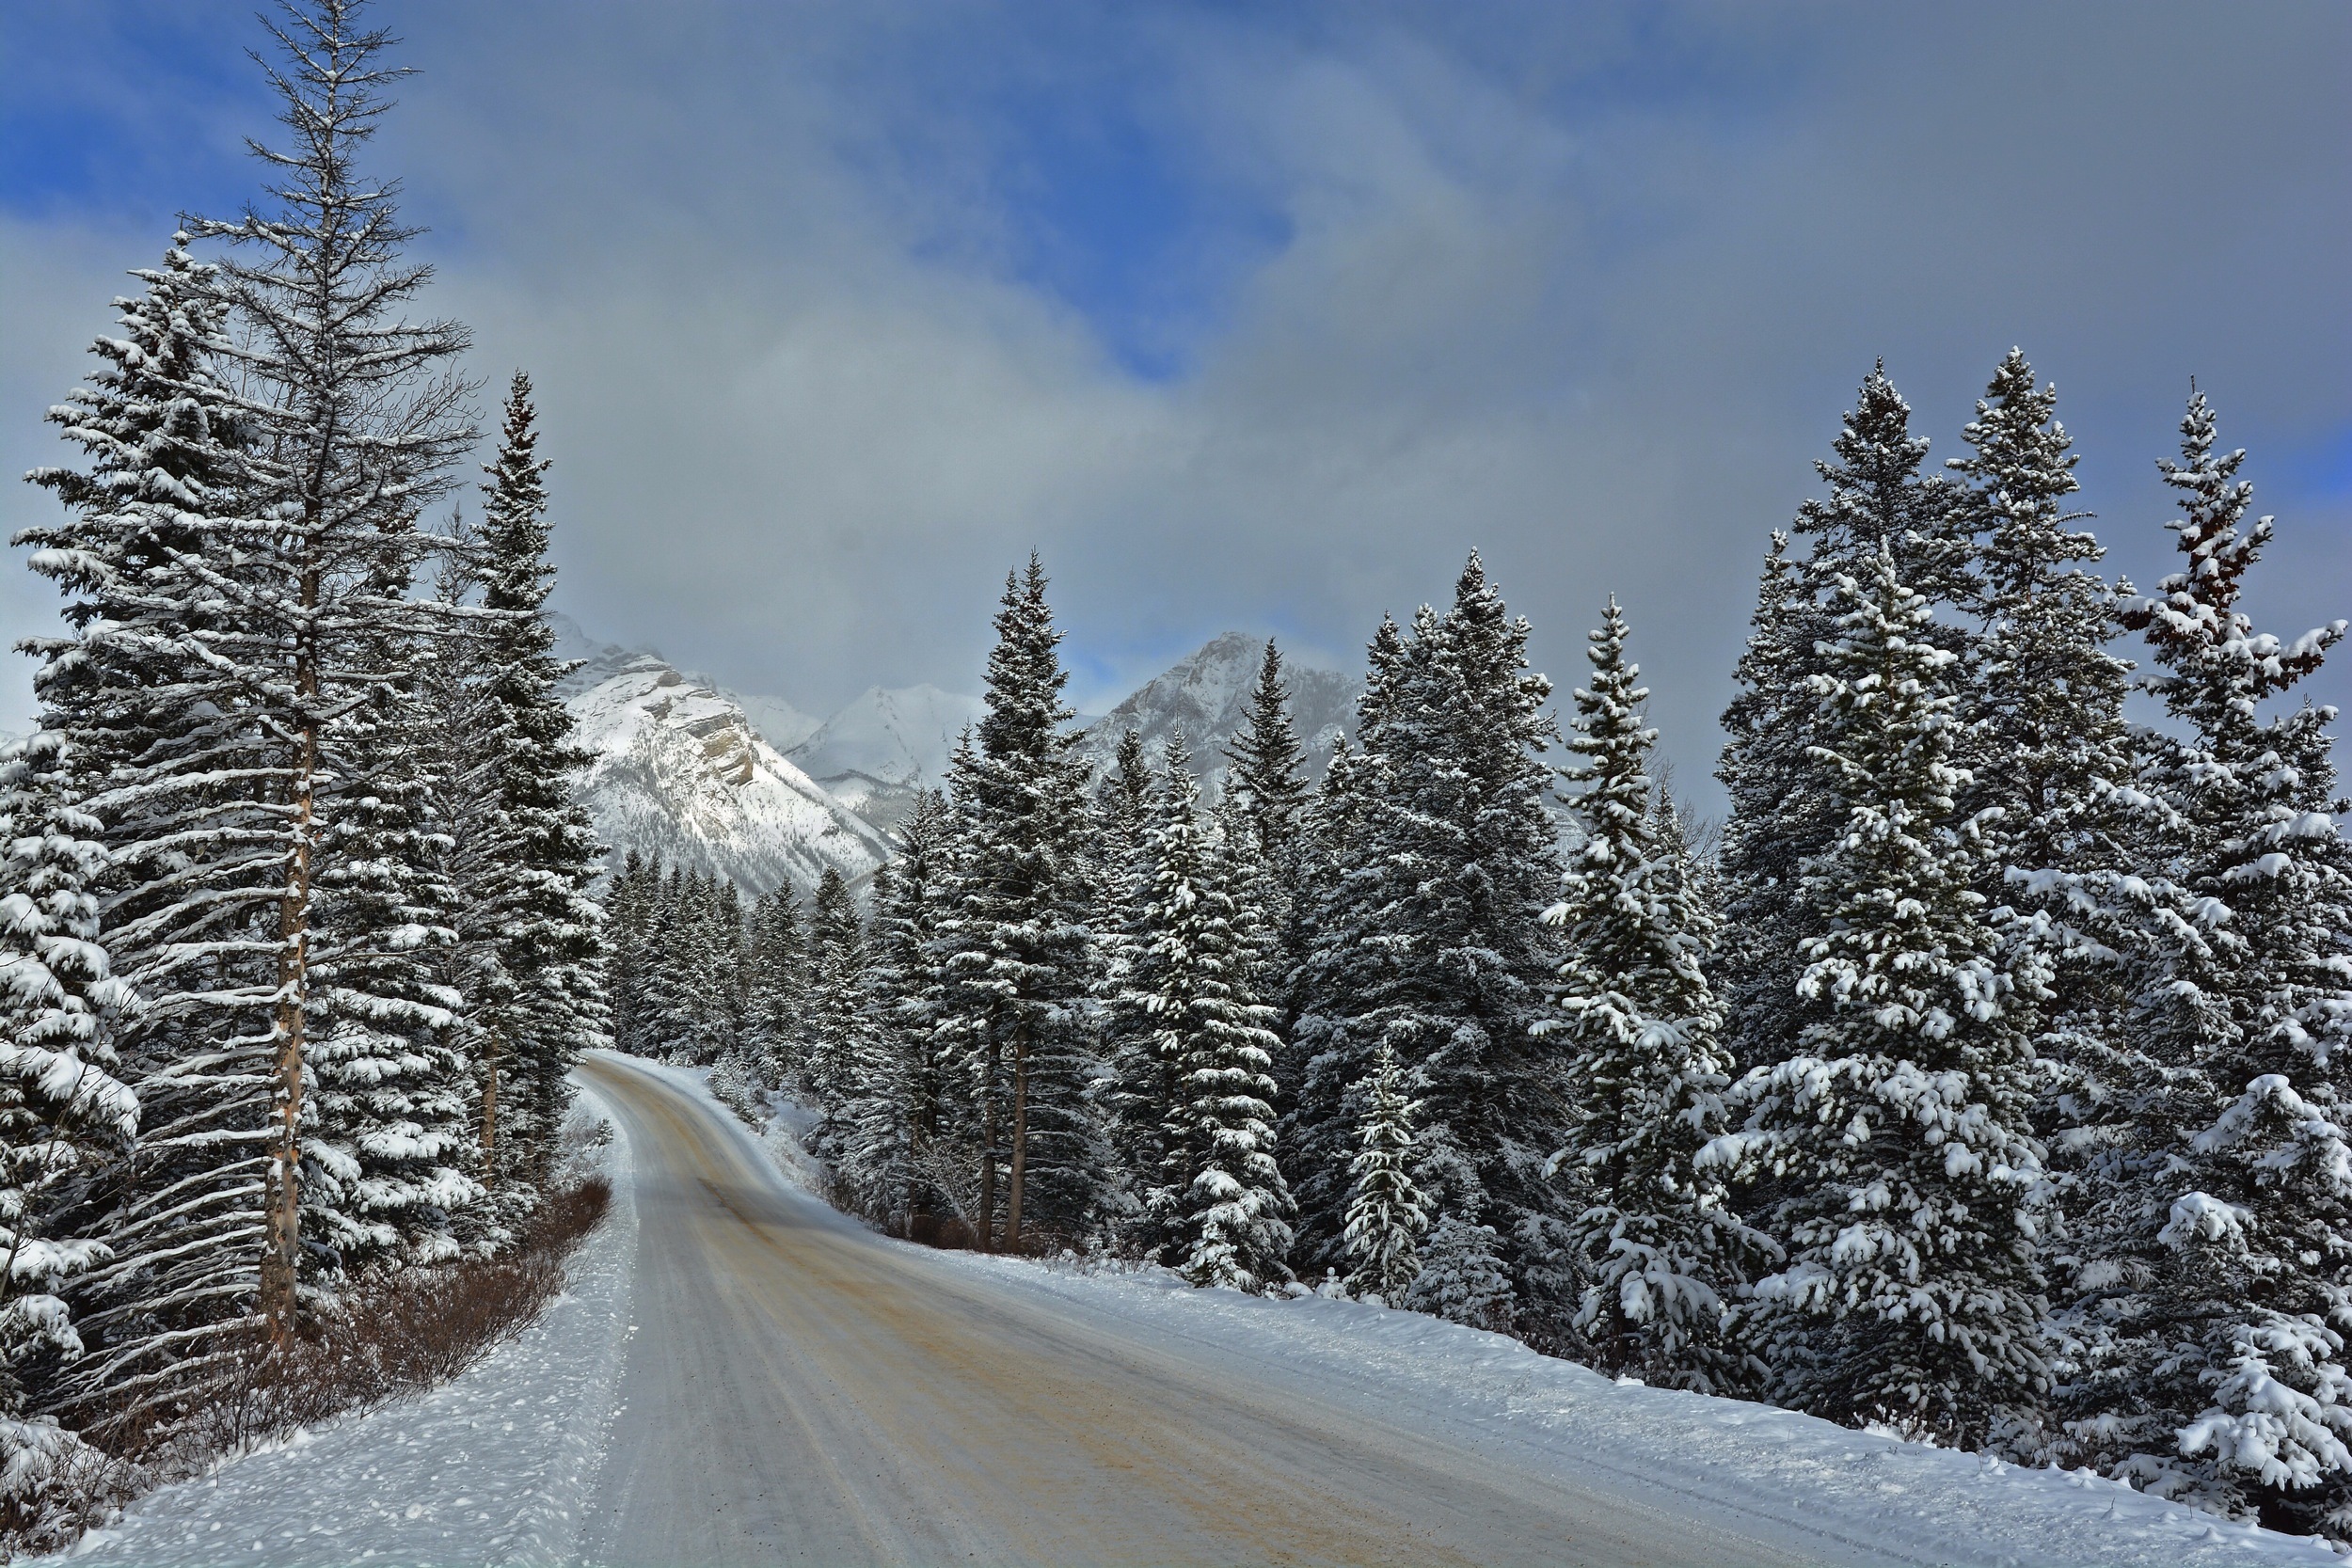 man made, road, banff national park, canada, landscape, mountain, pine, snow, tree, winter